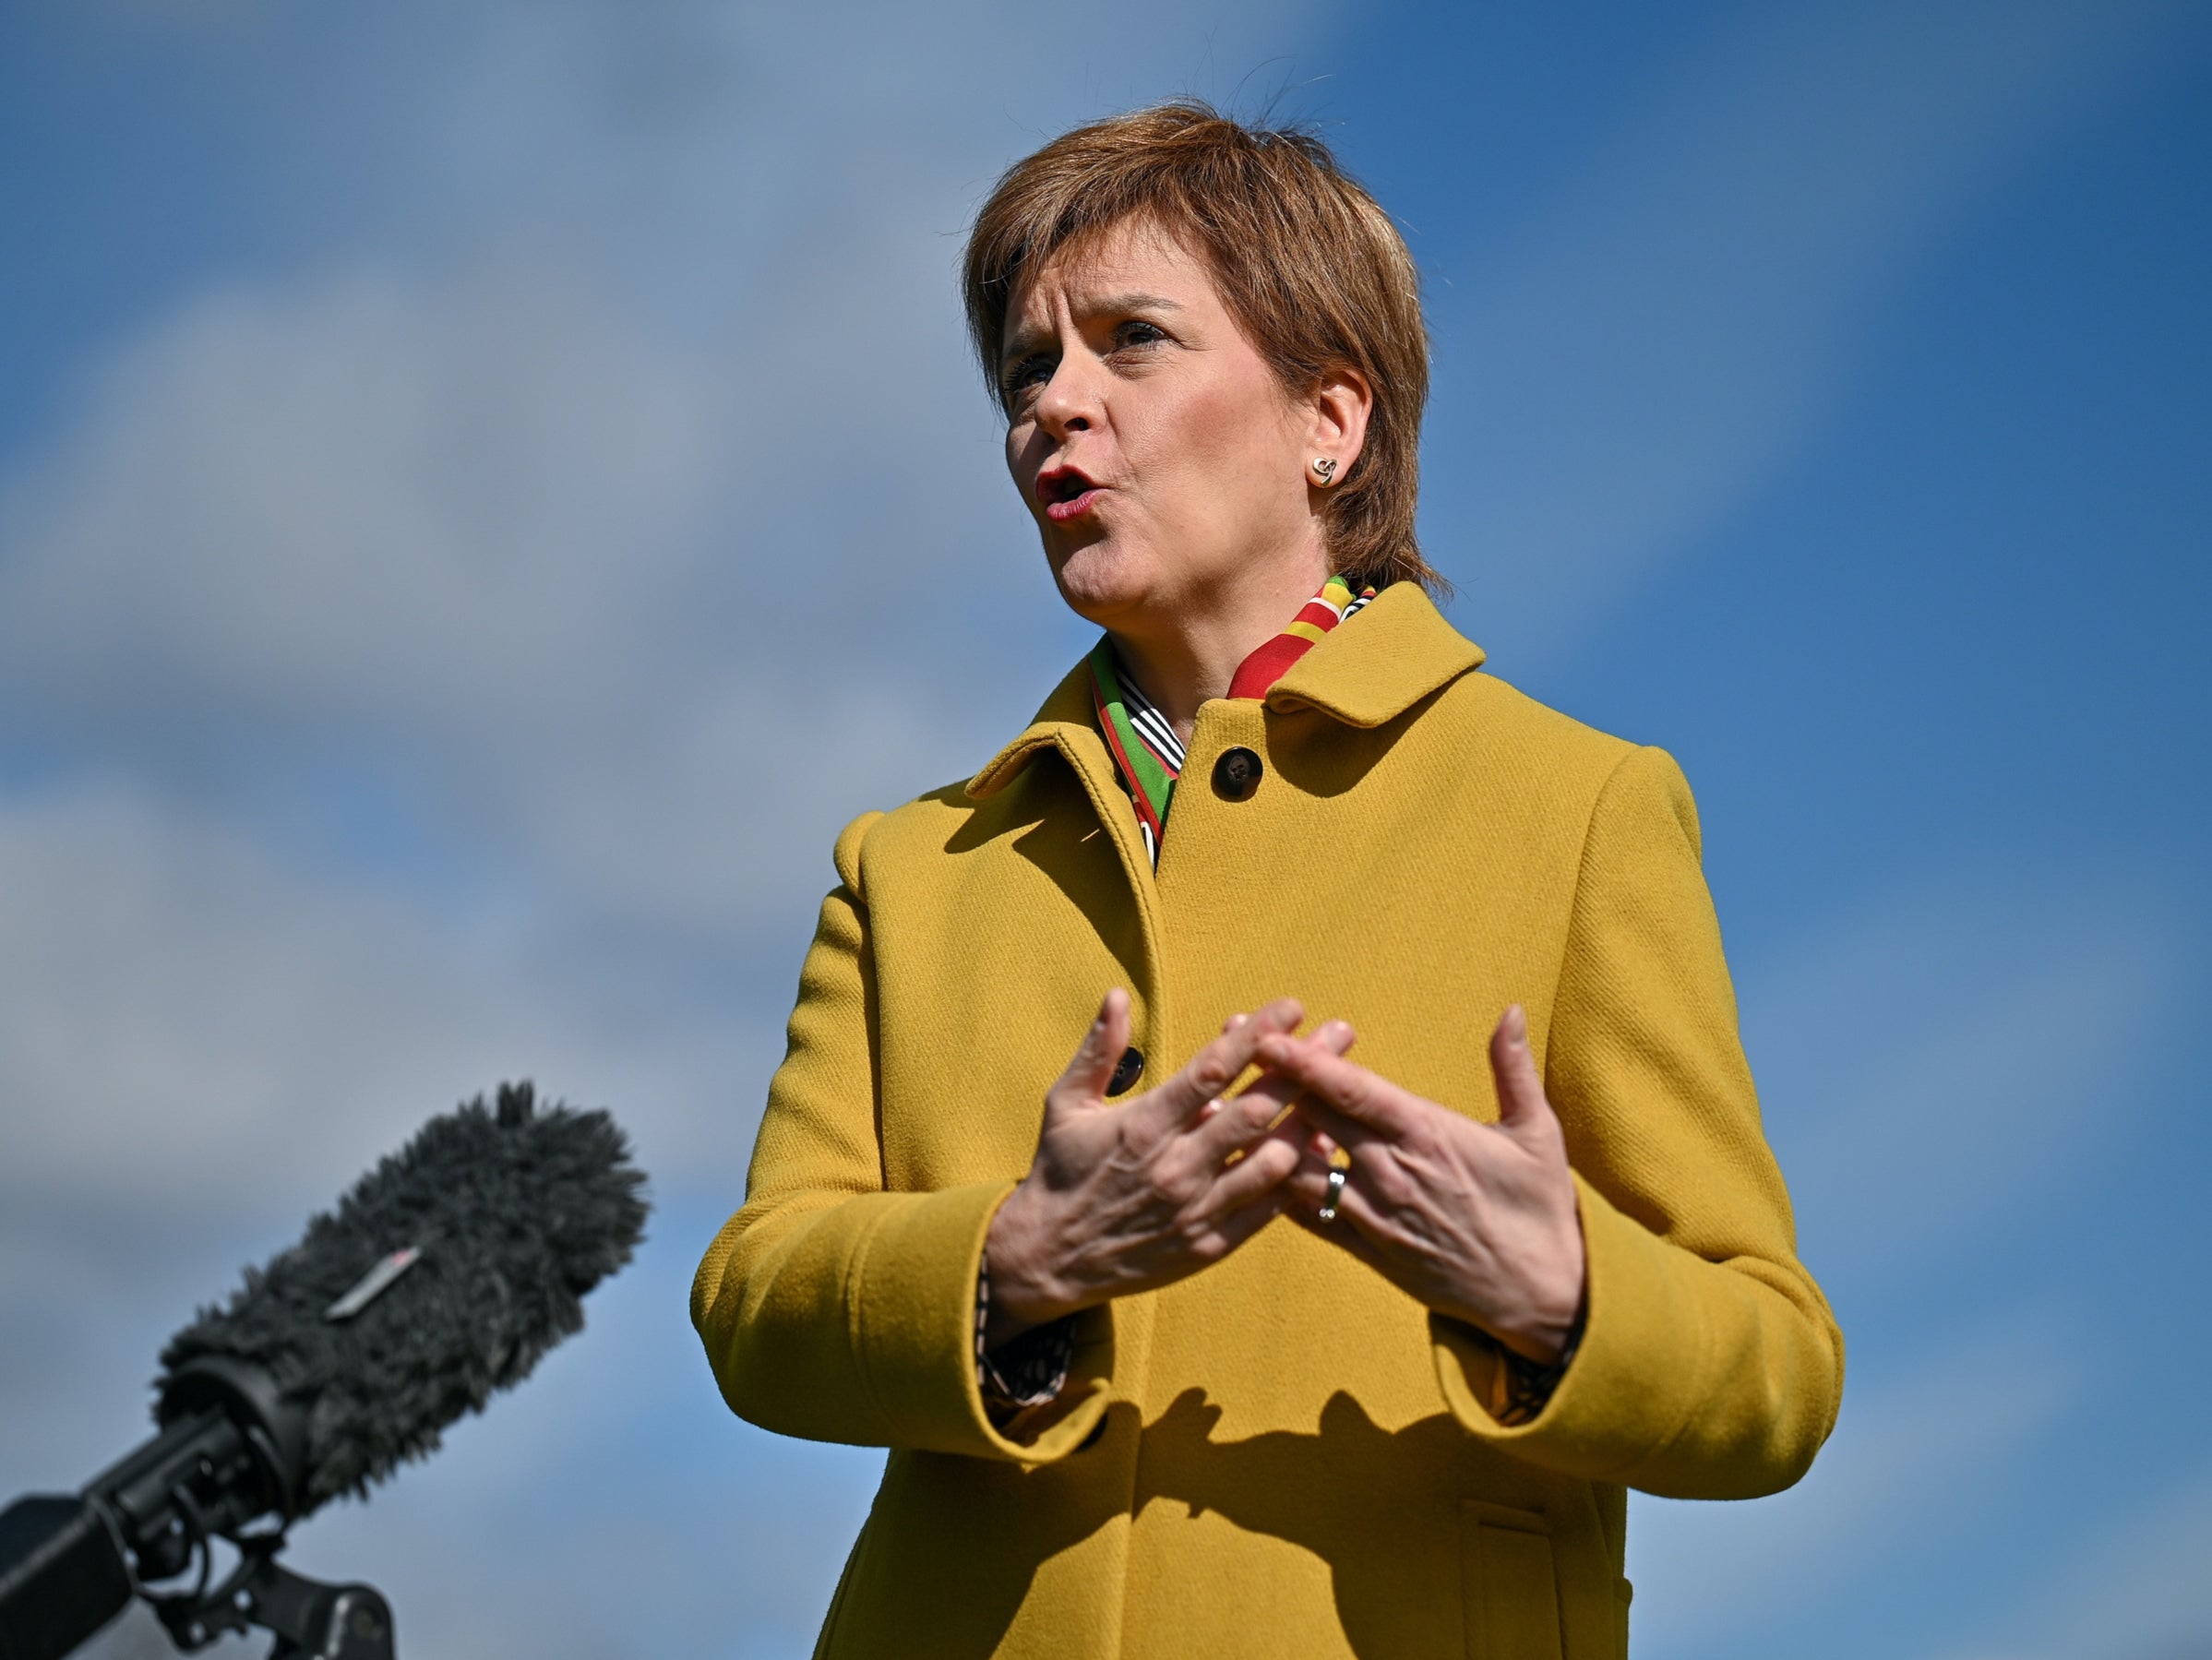 Nicola Sturgeon is backing companies that want to implement a four-day week